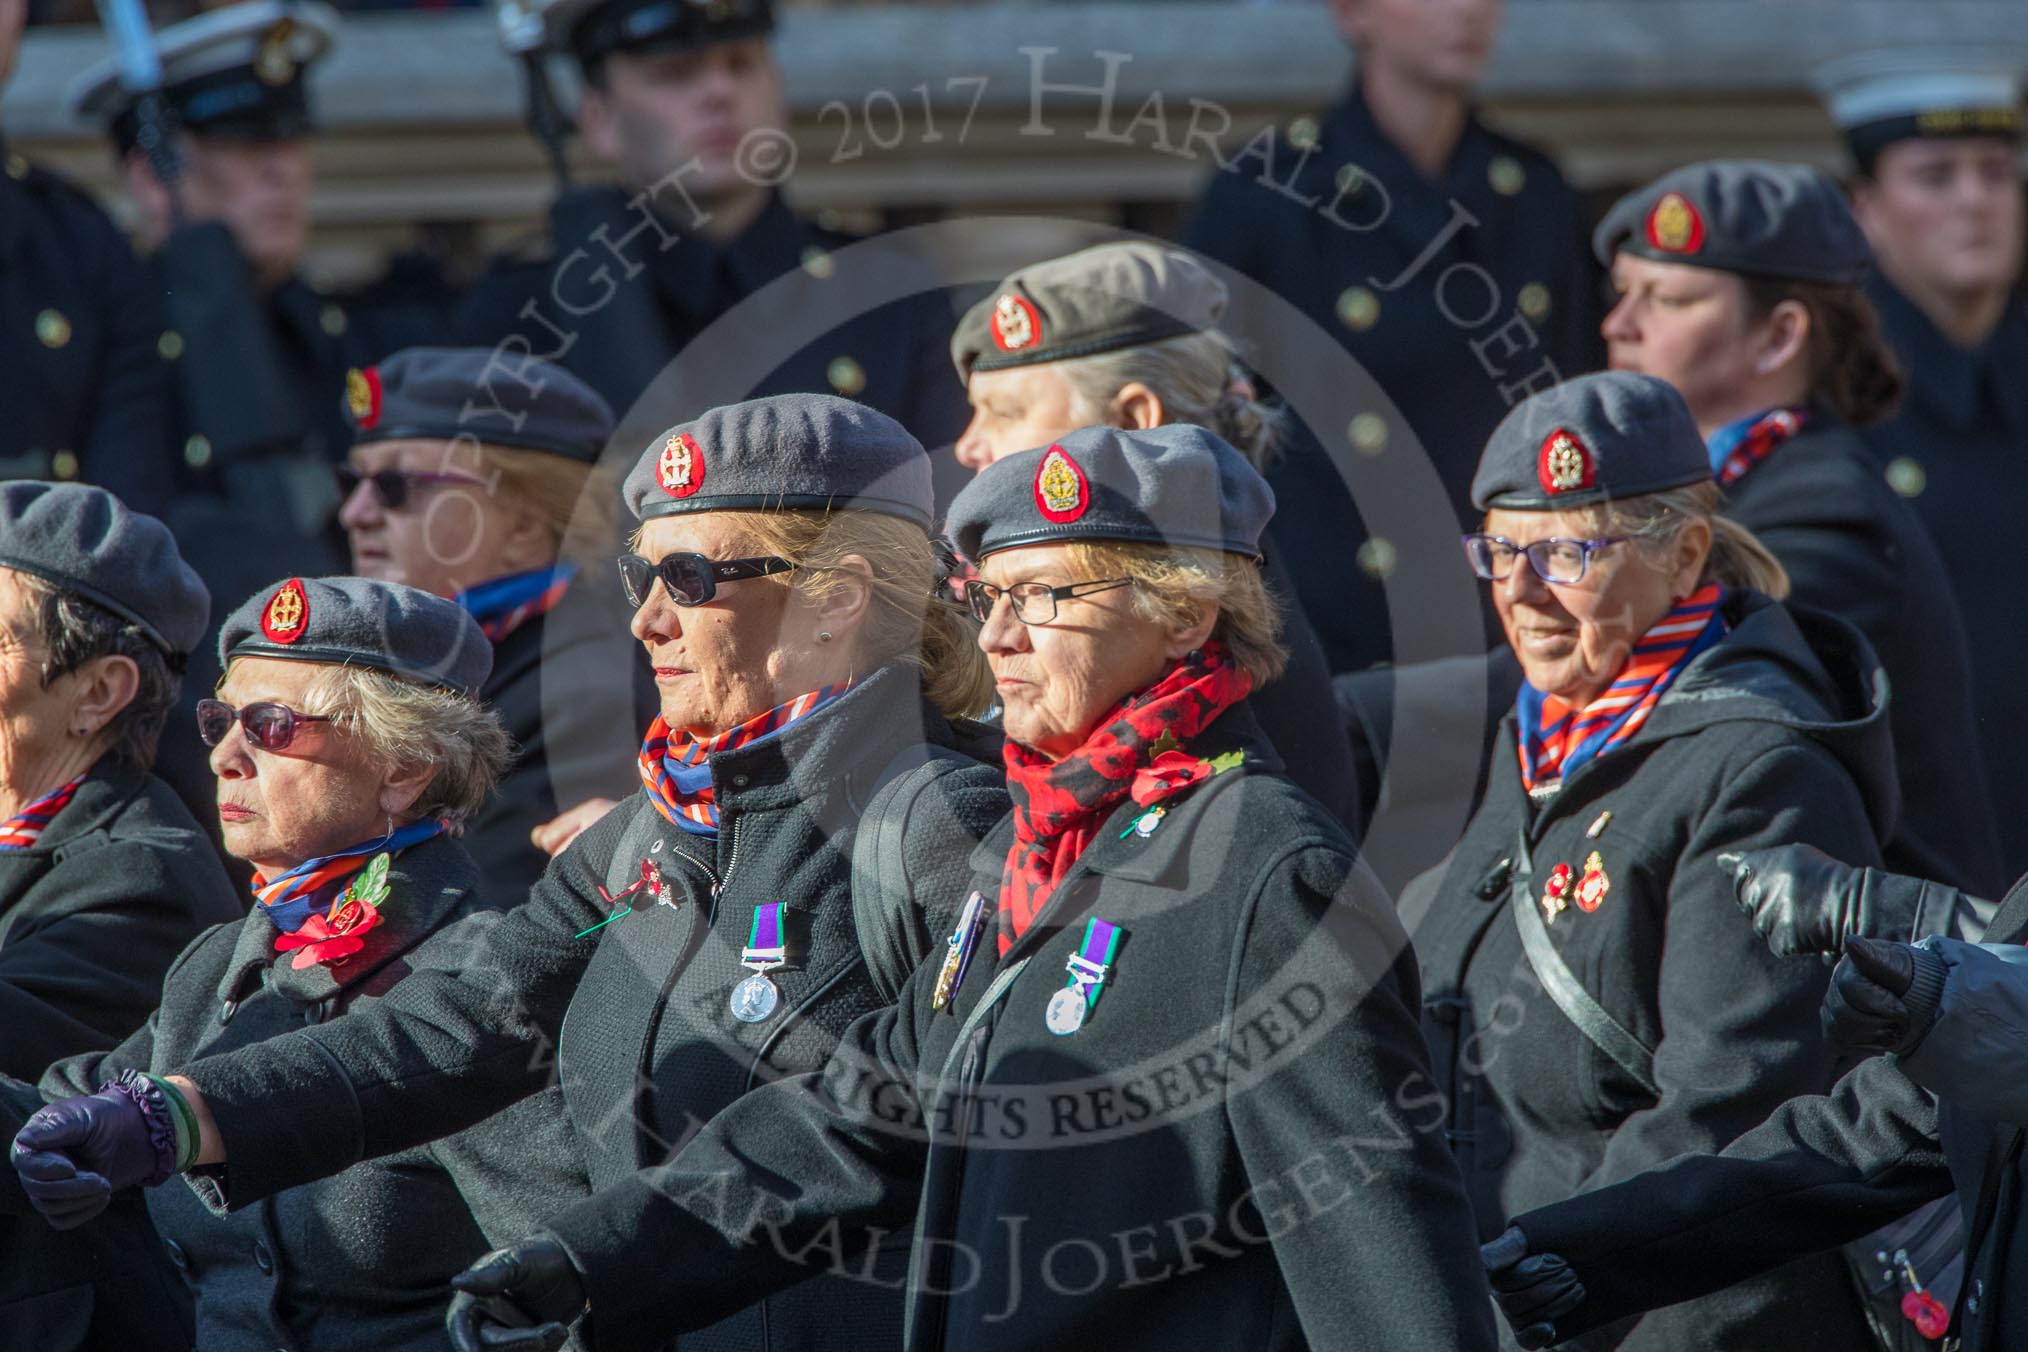 QARANC (Group D23, 49 members) during the Royal British Legion March Past on Remembrance Sunday at the Cenotaph, Whitehall, Westminster, London, 11 November 2018, 12:24.